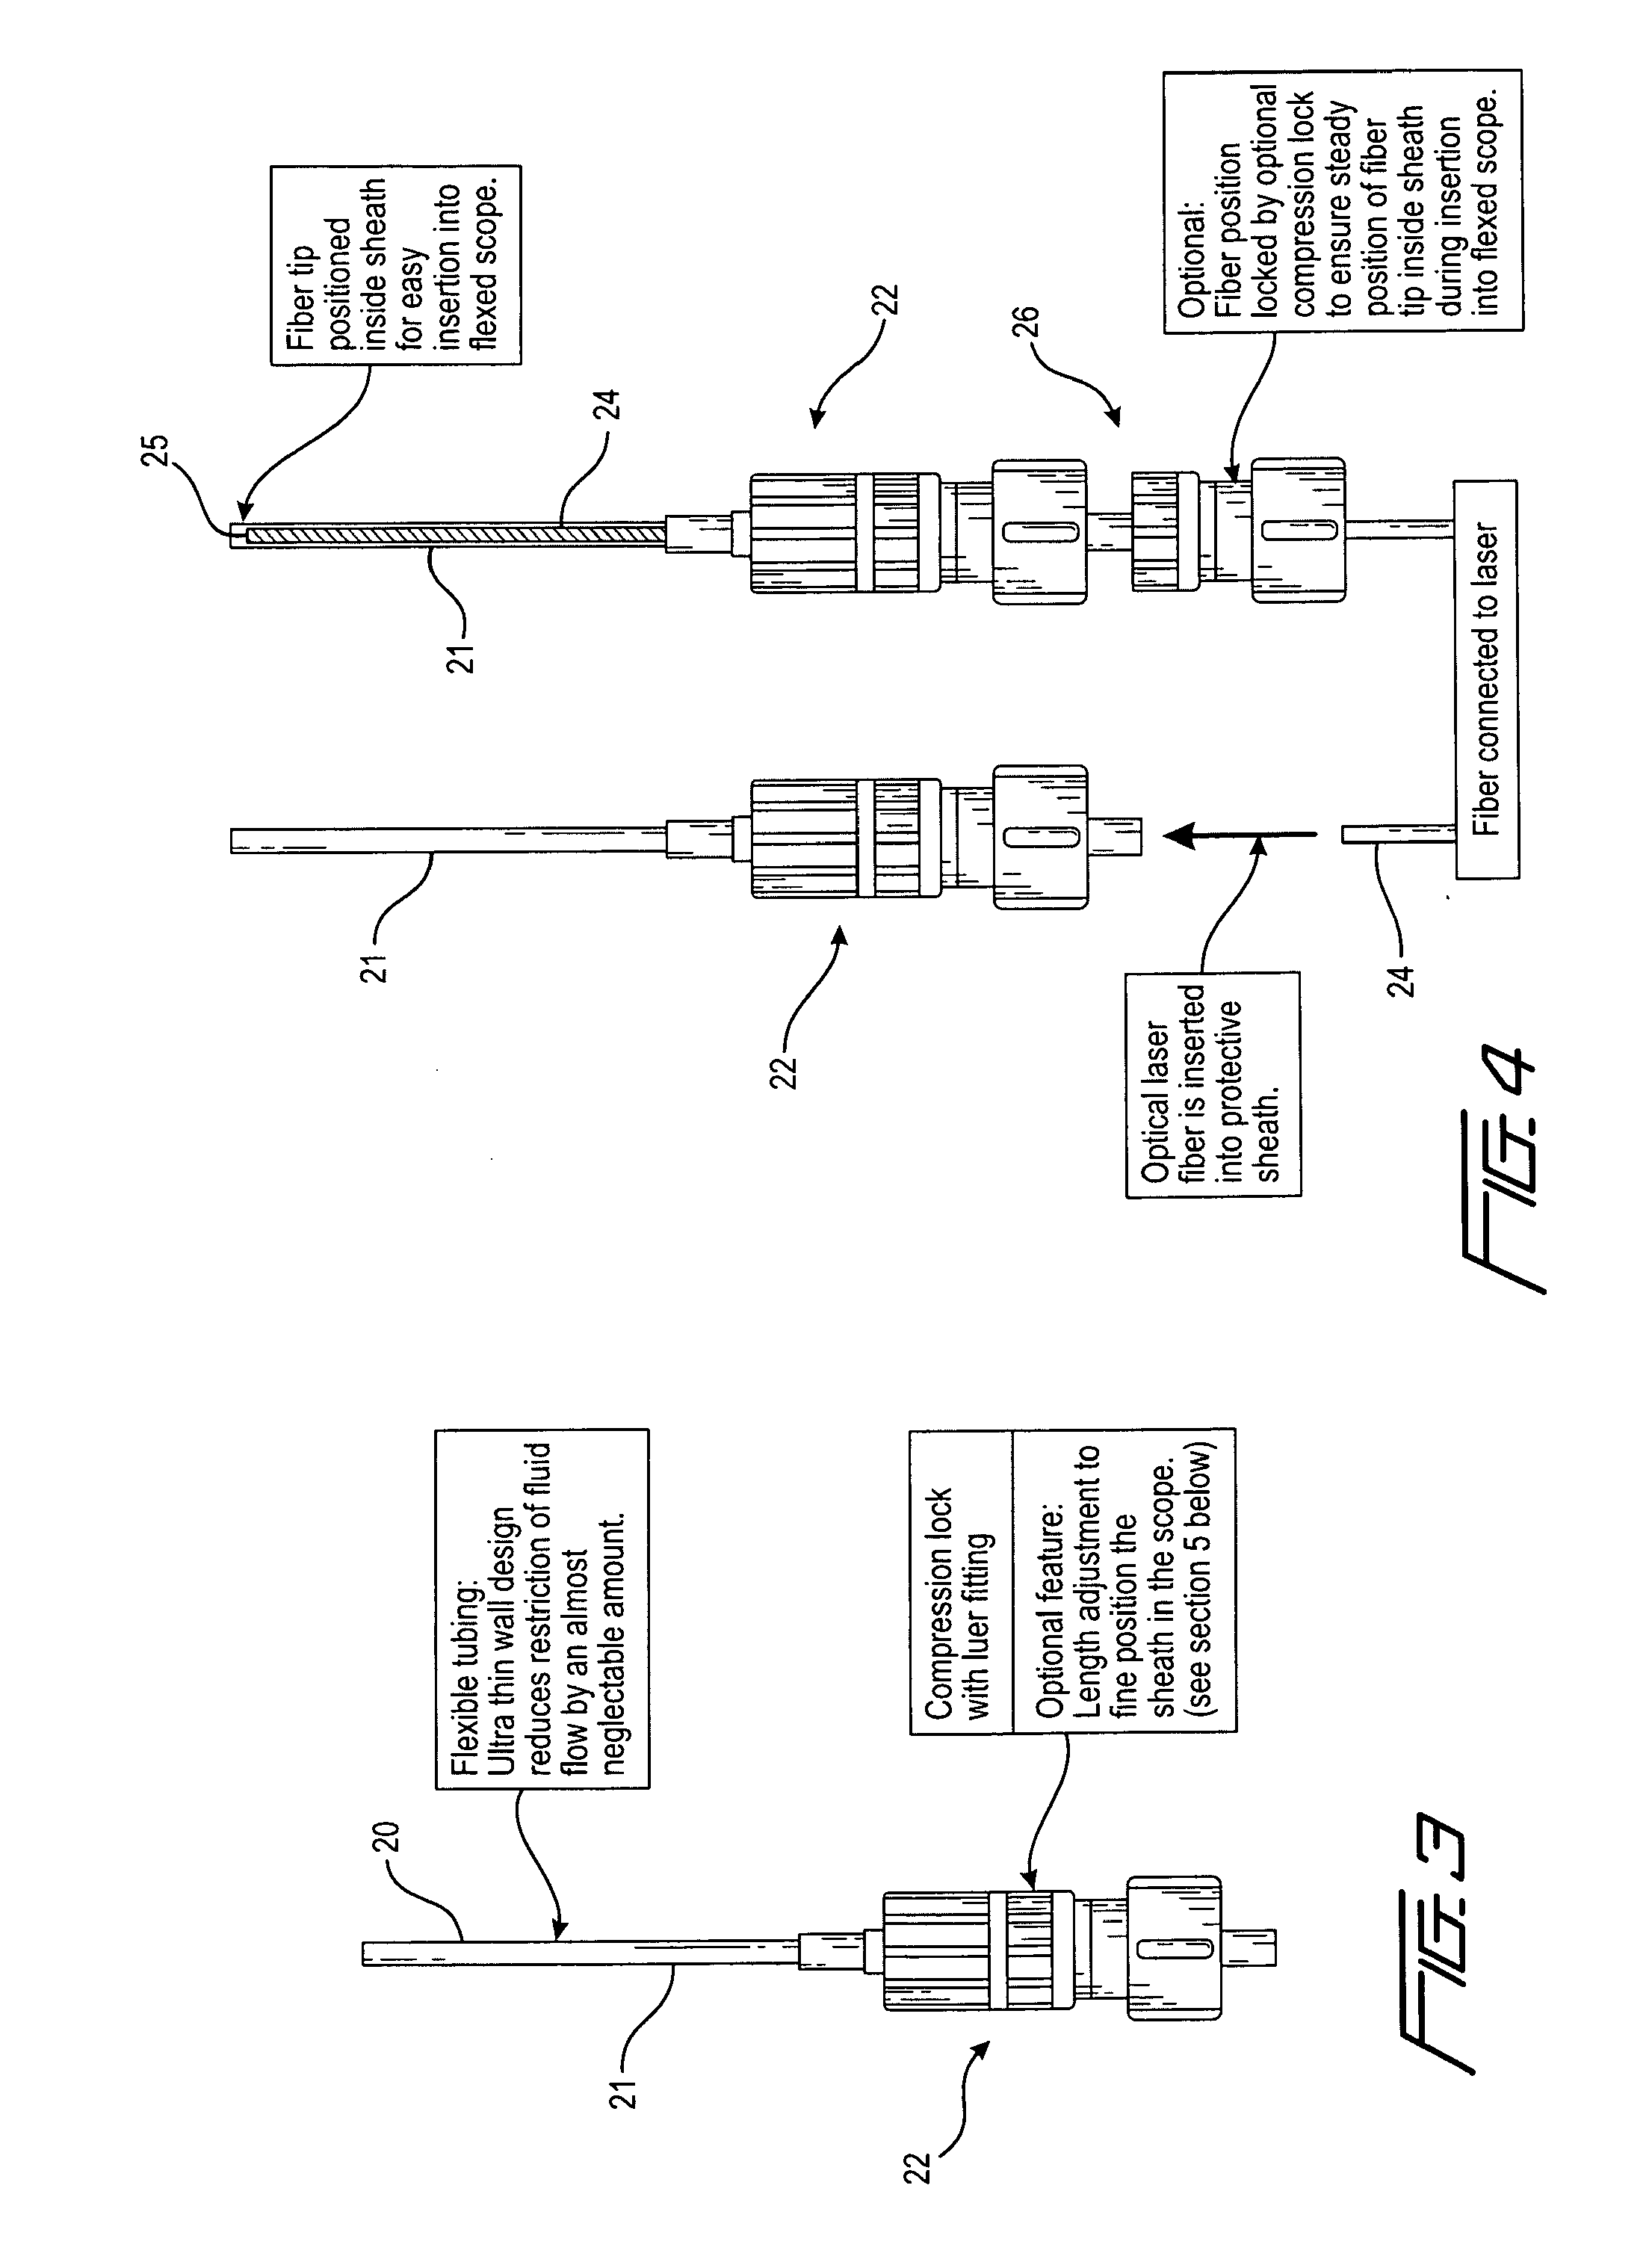 Apparatus and method for detecting overheating during laser surgery